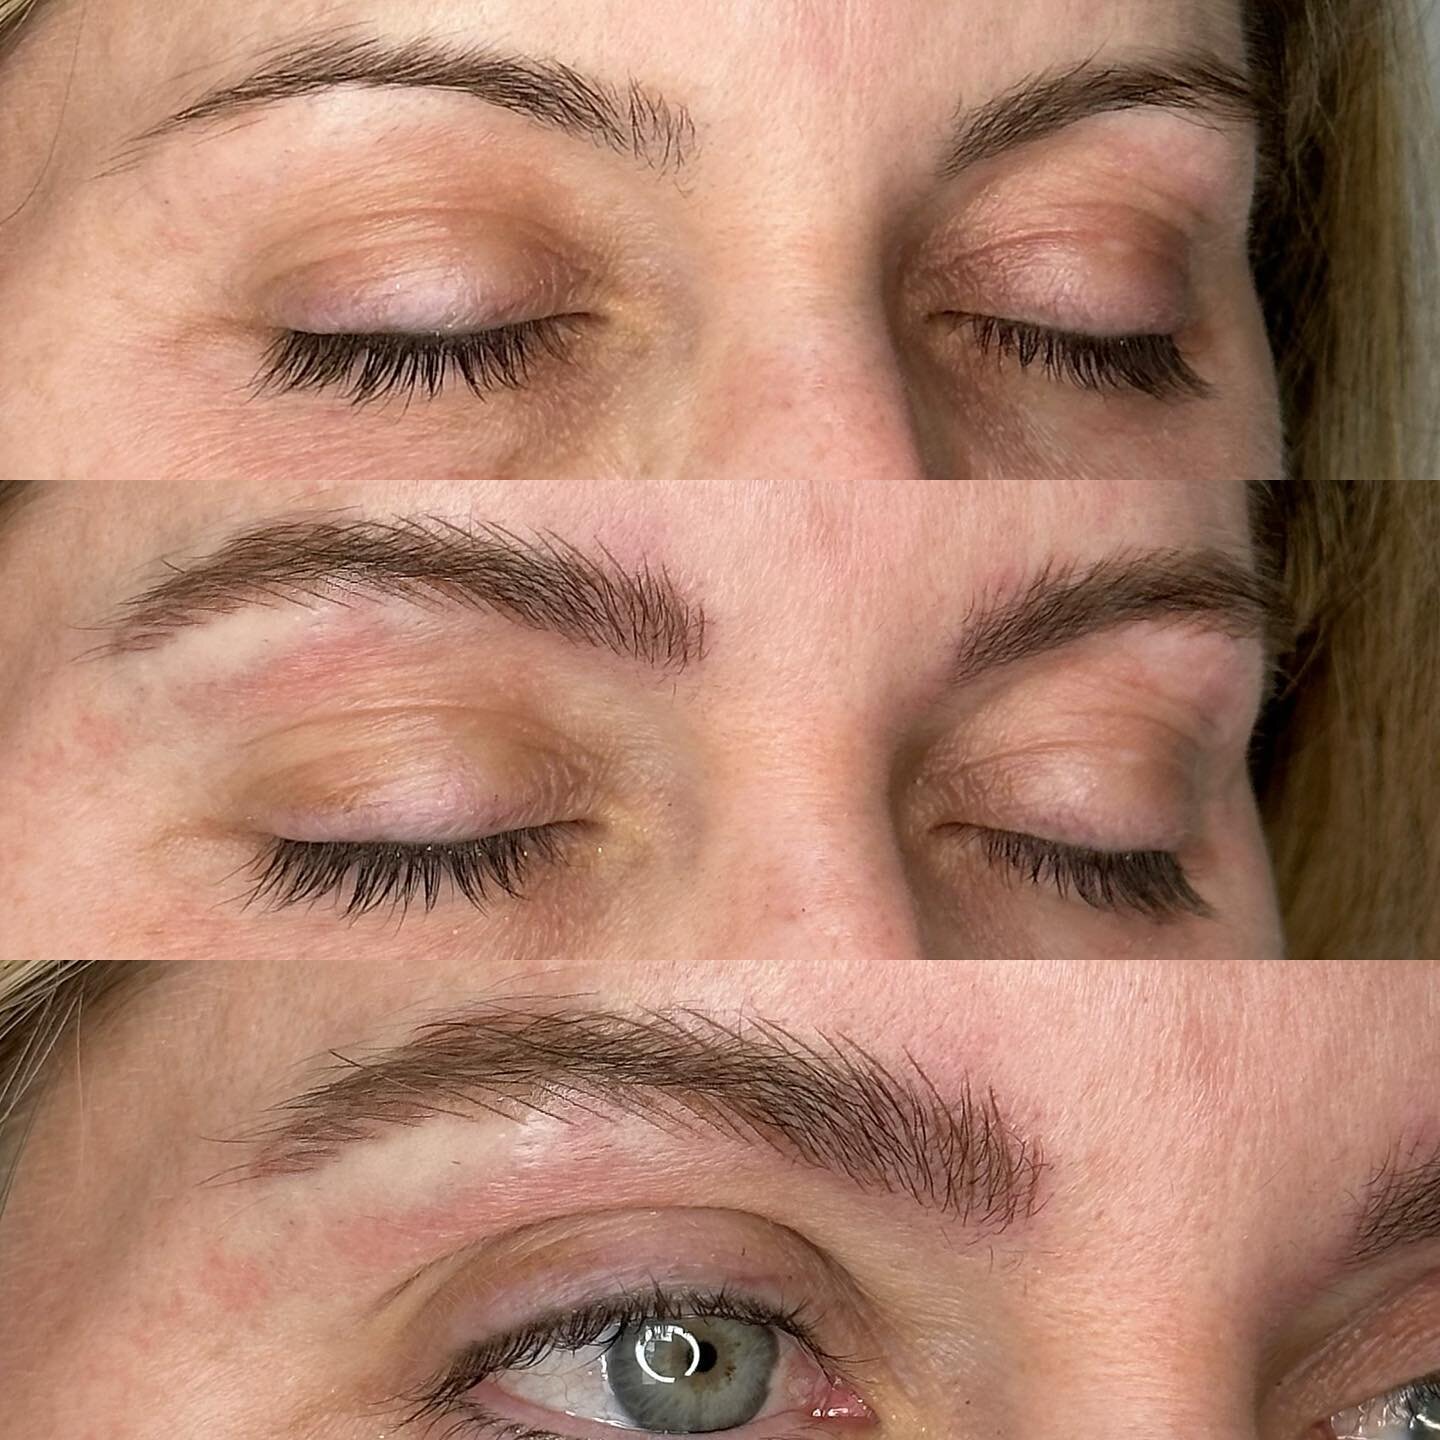 She traveled up from Austin so I can give her the brows she&rsquo;s always wanted. Totally worth it. Super natural #cosmetictattooing @elanmedspaclinic #studioiris #texas 
Shown in Order
✦ Before
✦ After 
✦ Close-up 
:
:
:
:
:
:
:
#naturalbrows #brow